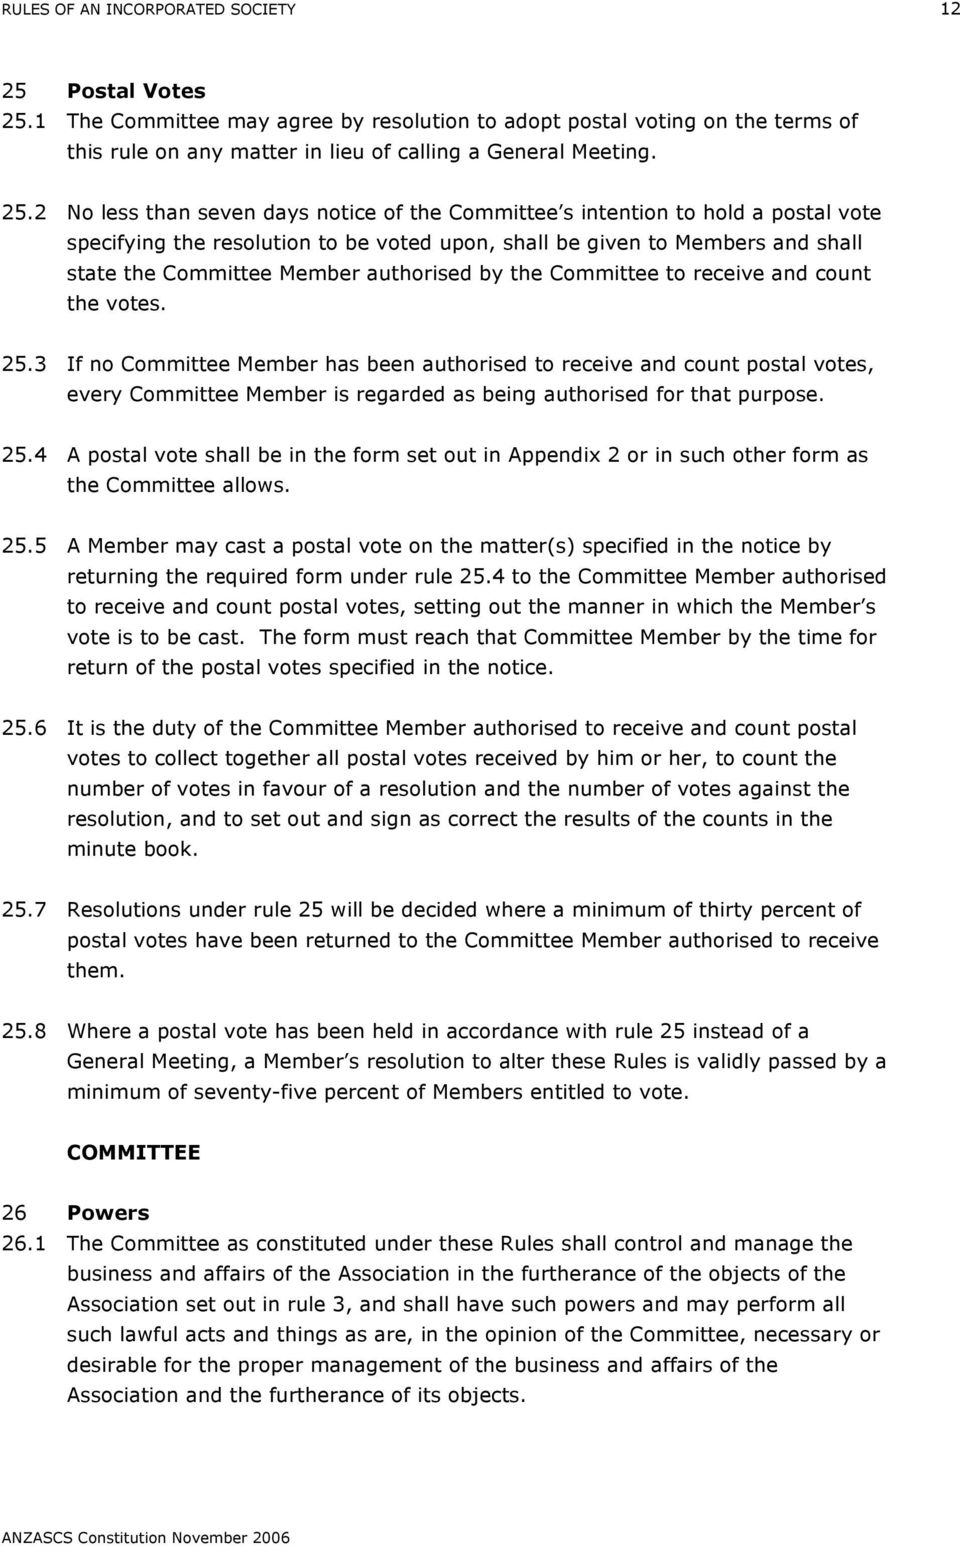 1 The Committee may agree by resolution to adopt postal voting on the terms of this rule on any matter in lieu of calling a General Meeting. 25.